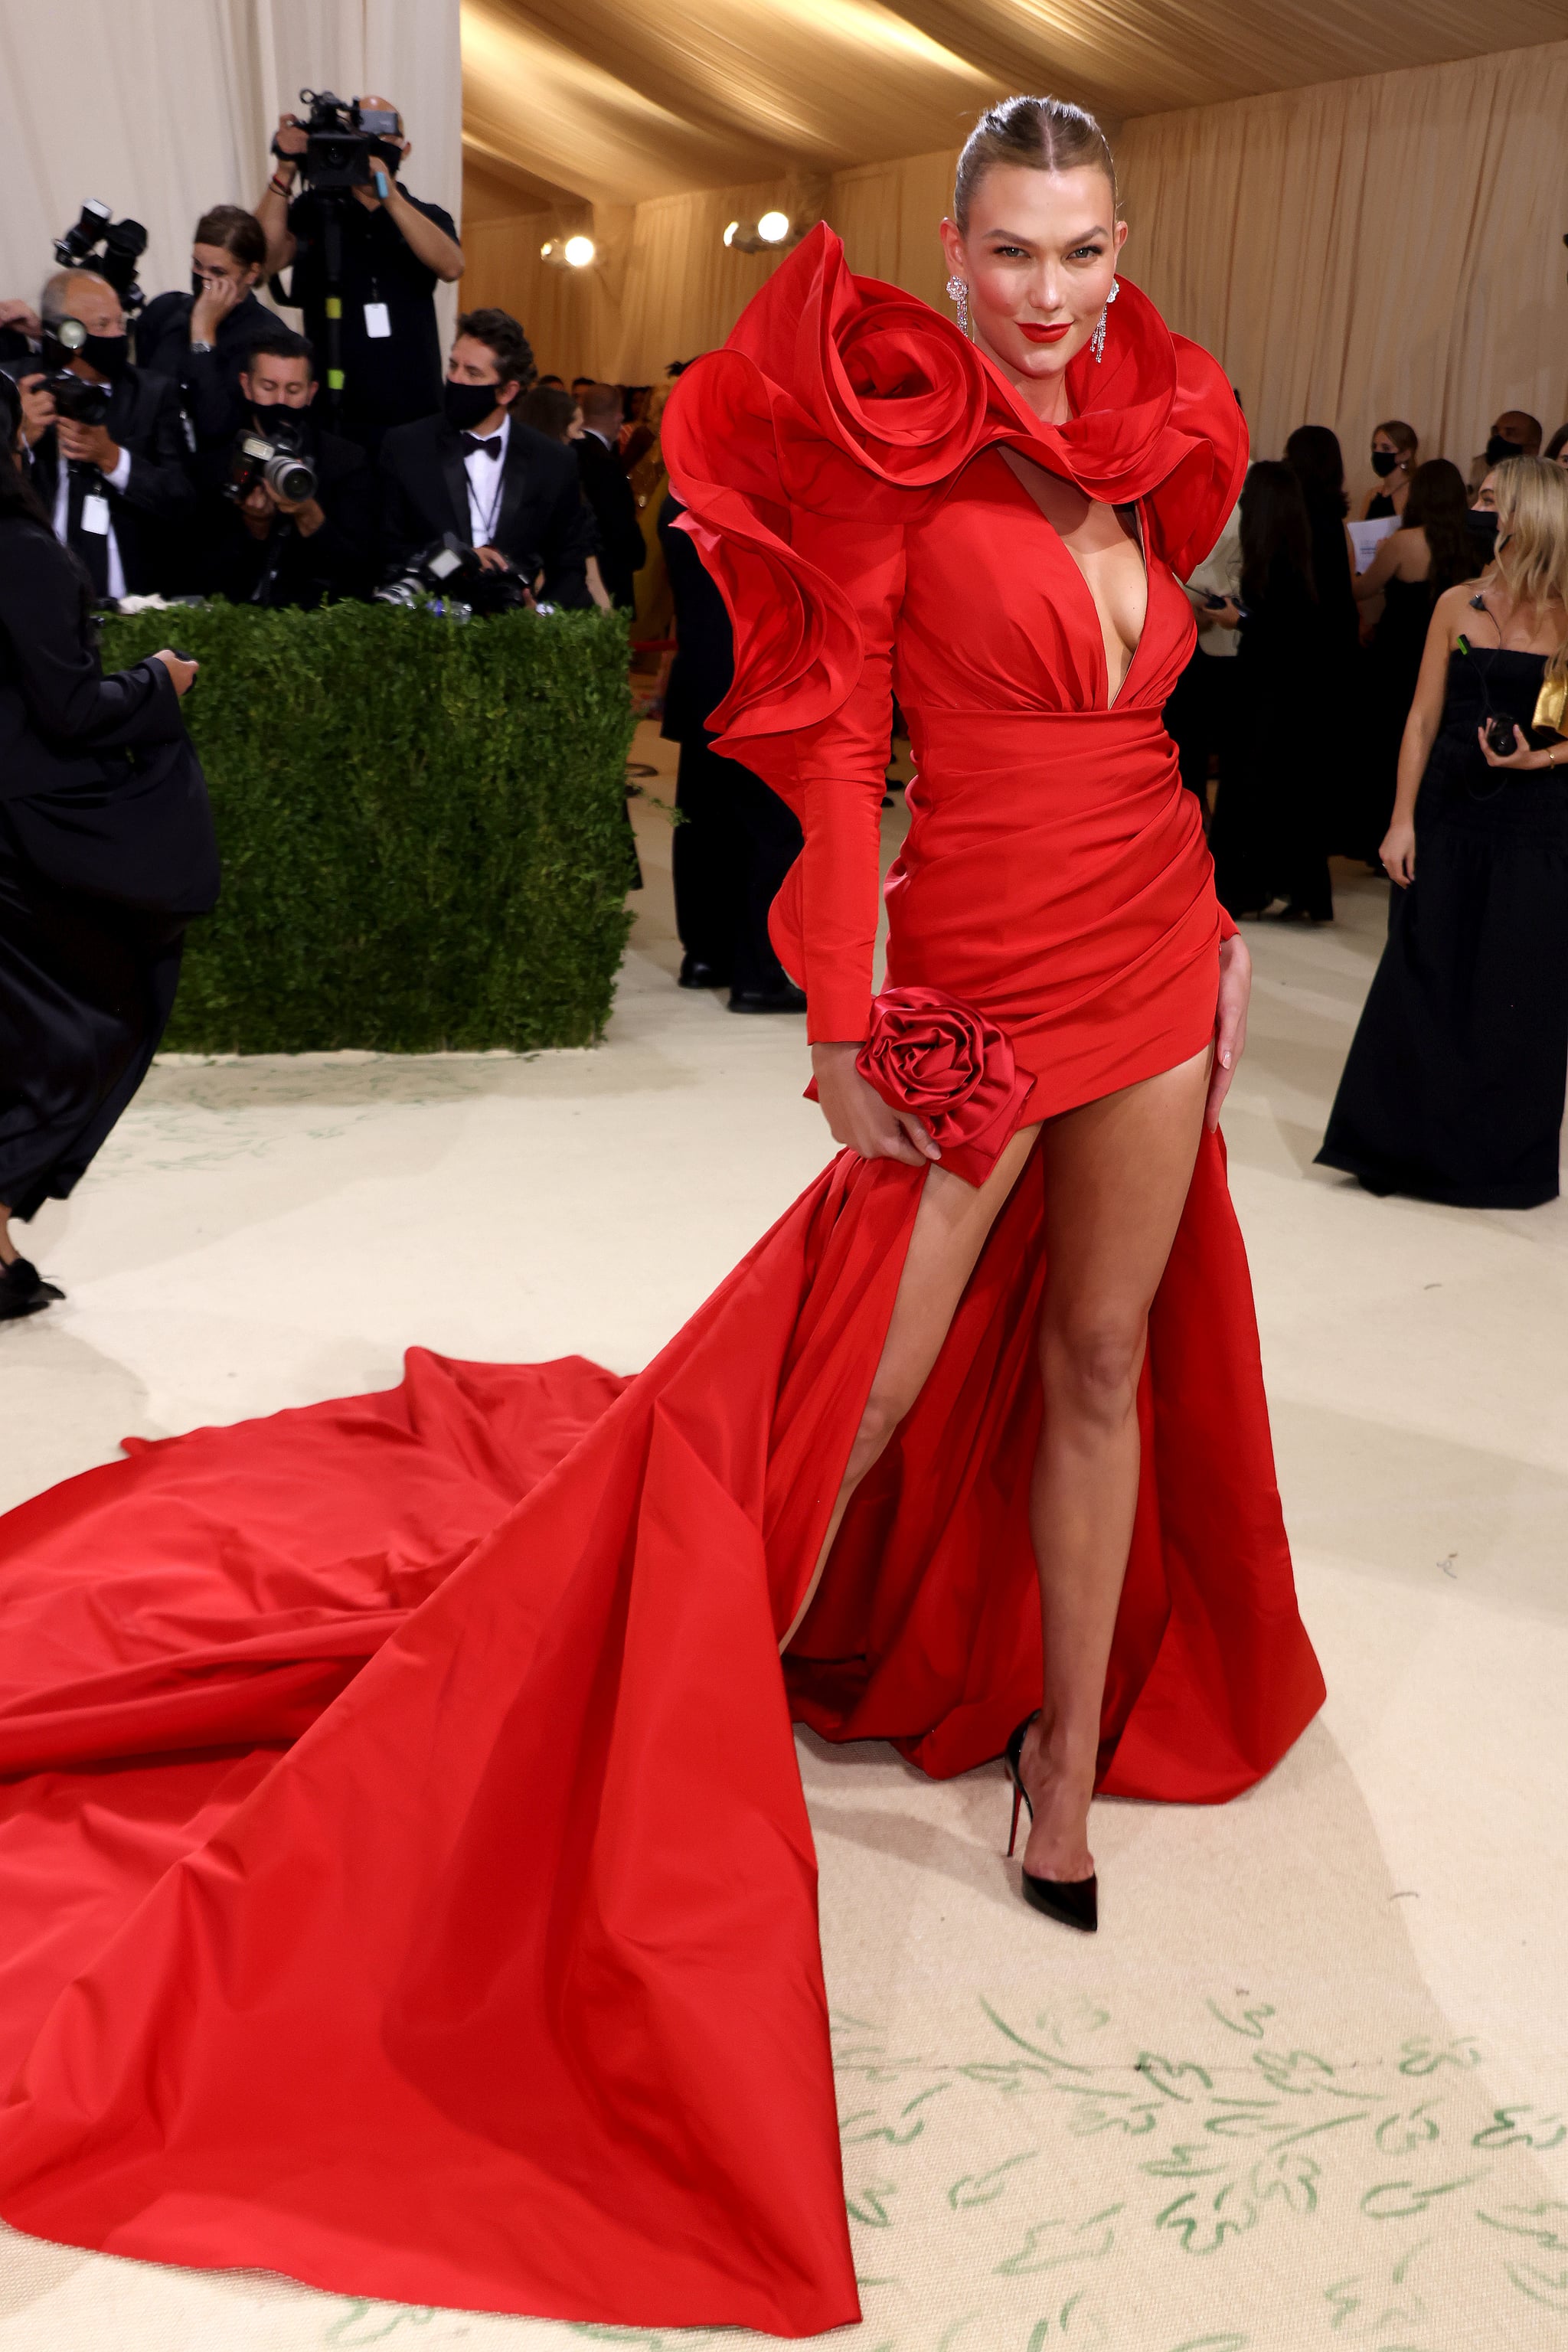 Met Gala 2021: All The Red Carpet Celebrity Dresses and Looks — American  Fashion Theme